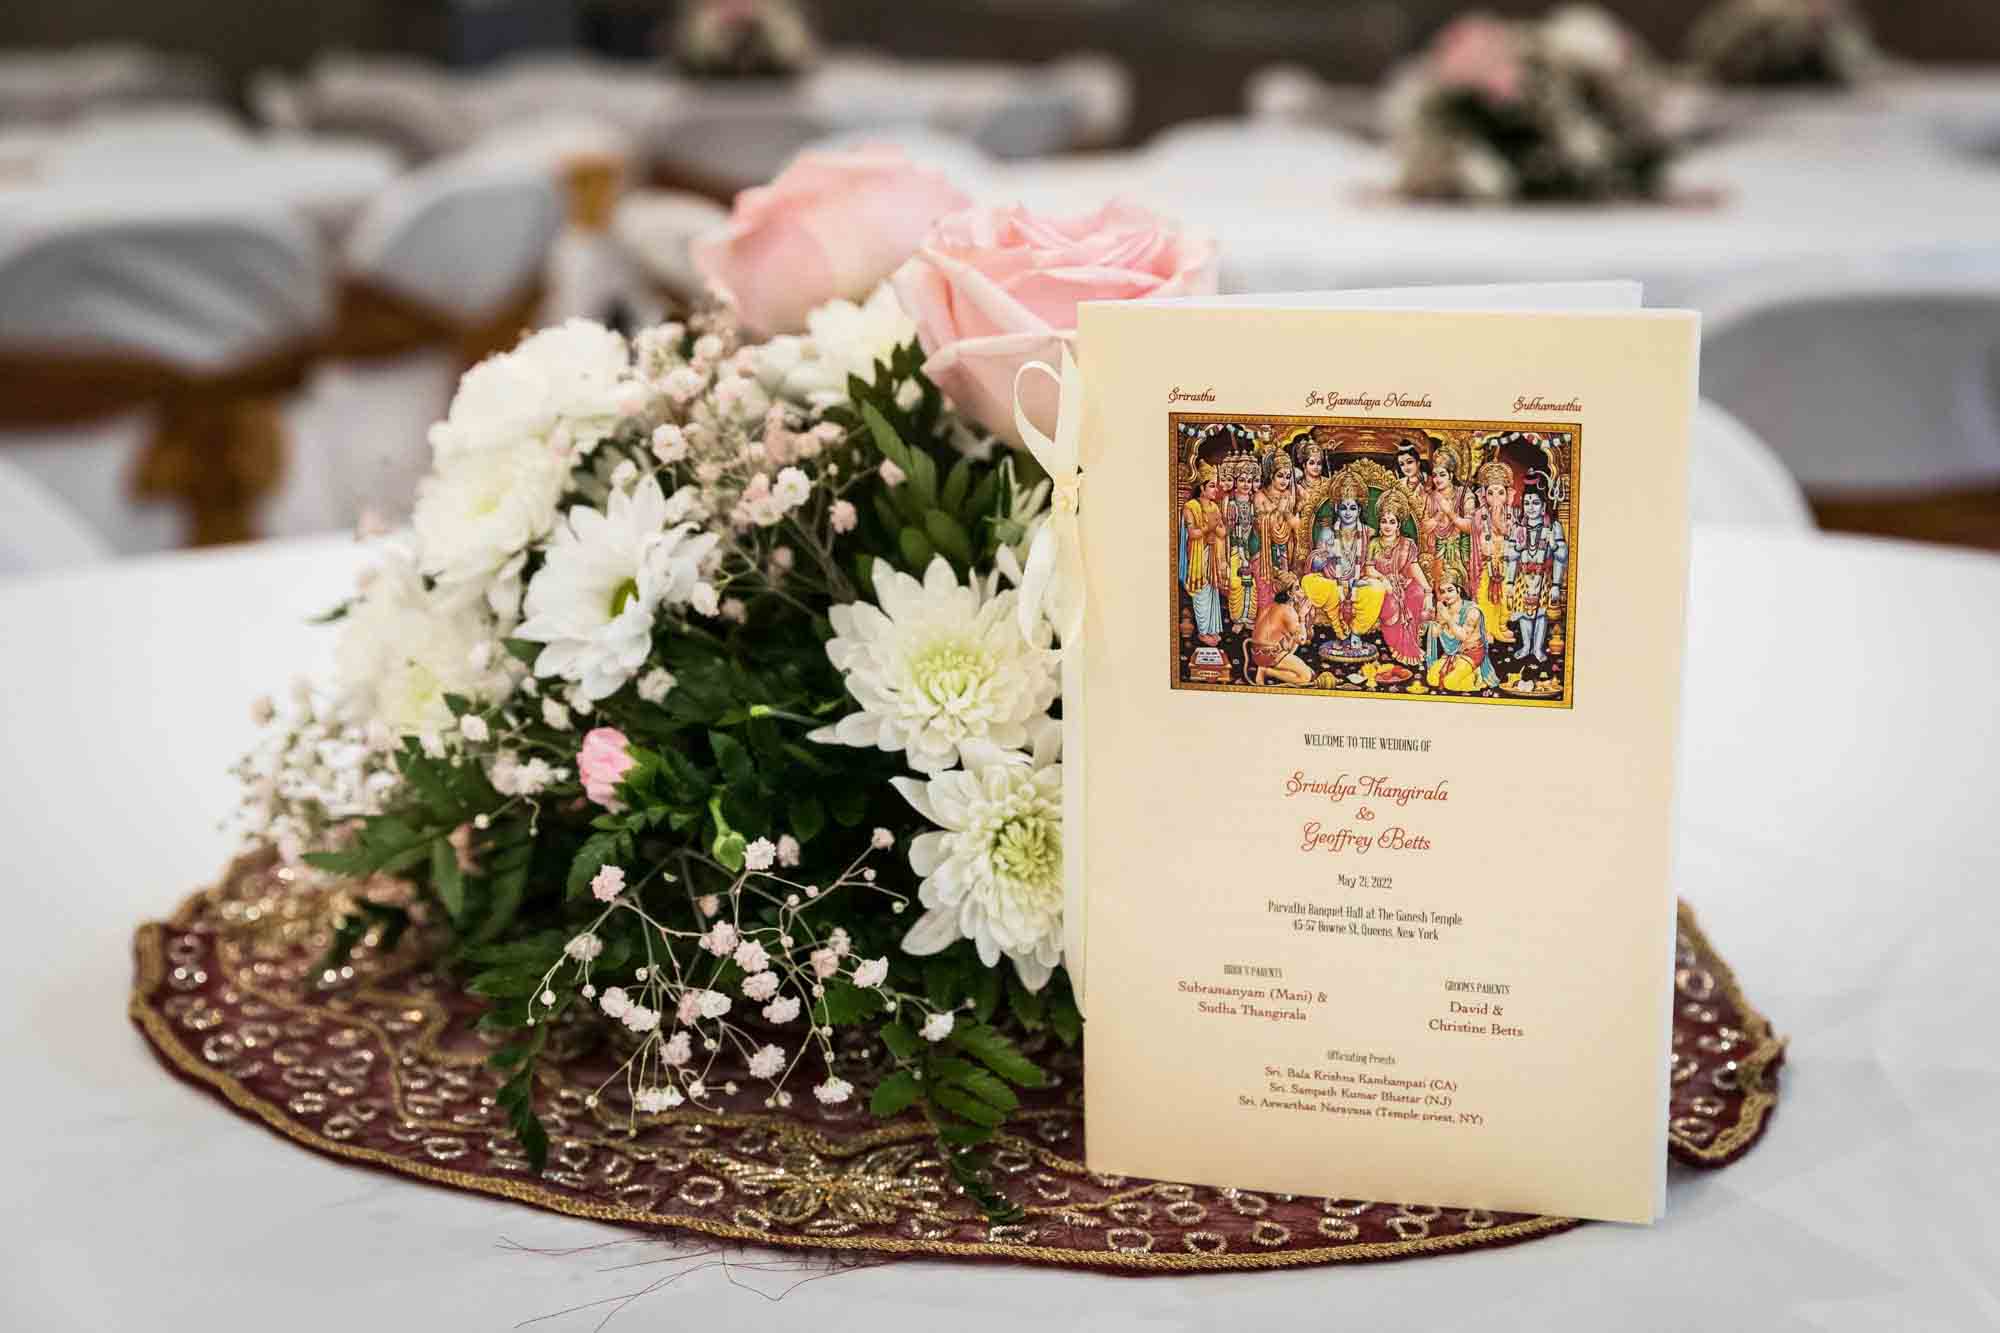 Vedic ceremony program beside bouquet of flowers on a table